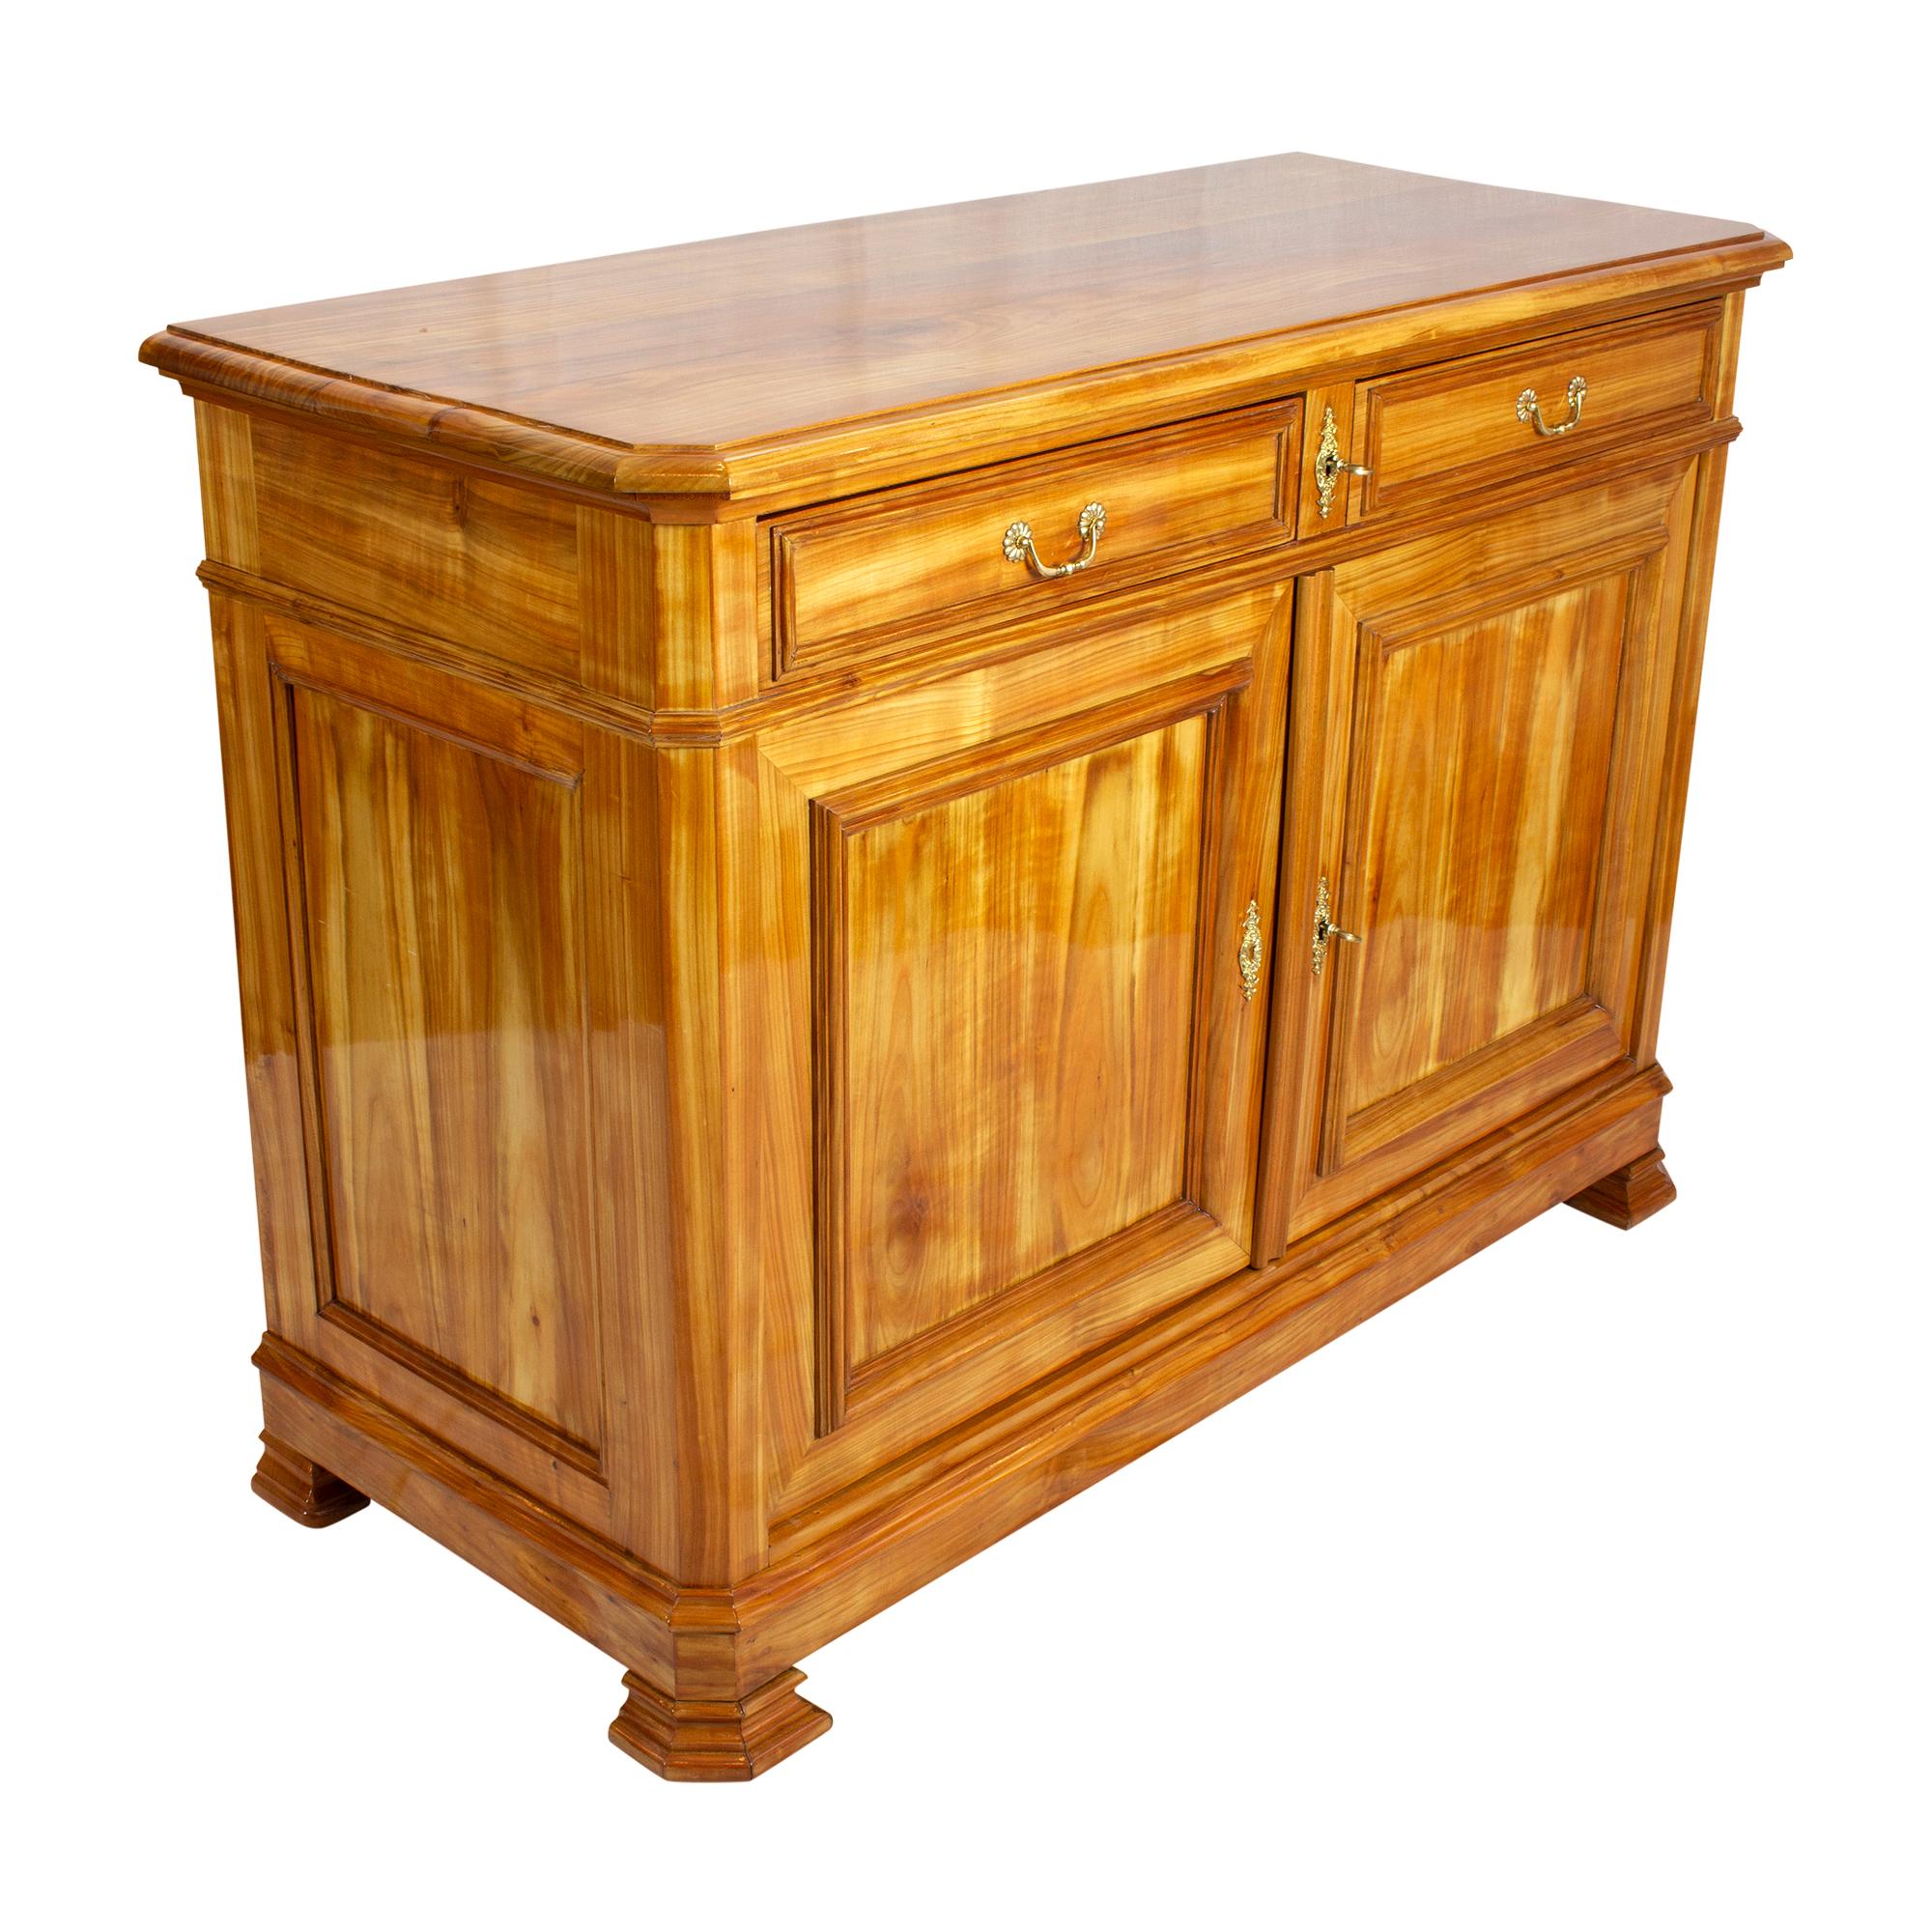 The sideboard originates from Switzerland in the late Biedermeier period around 1850 (transition to historicism). The furniture was made of solid cherrywood. The backside is made of spruce. It can be assumed that it is wild cherry, as the mass is